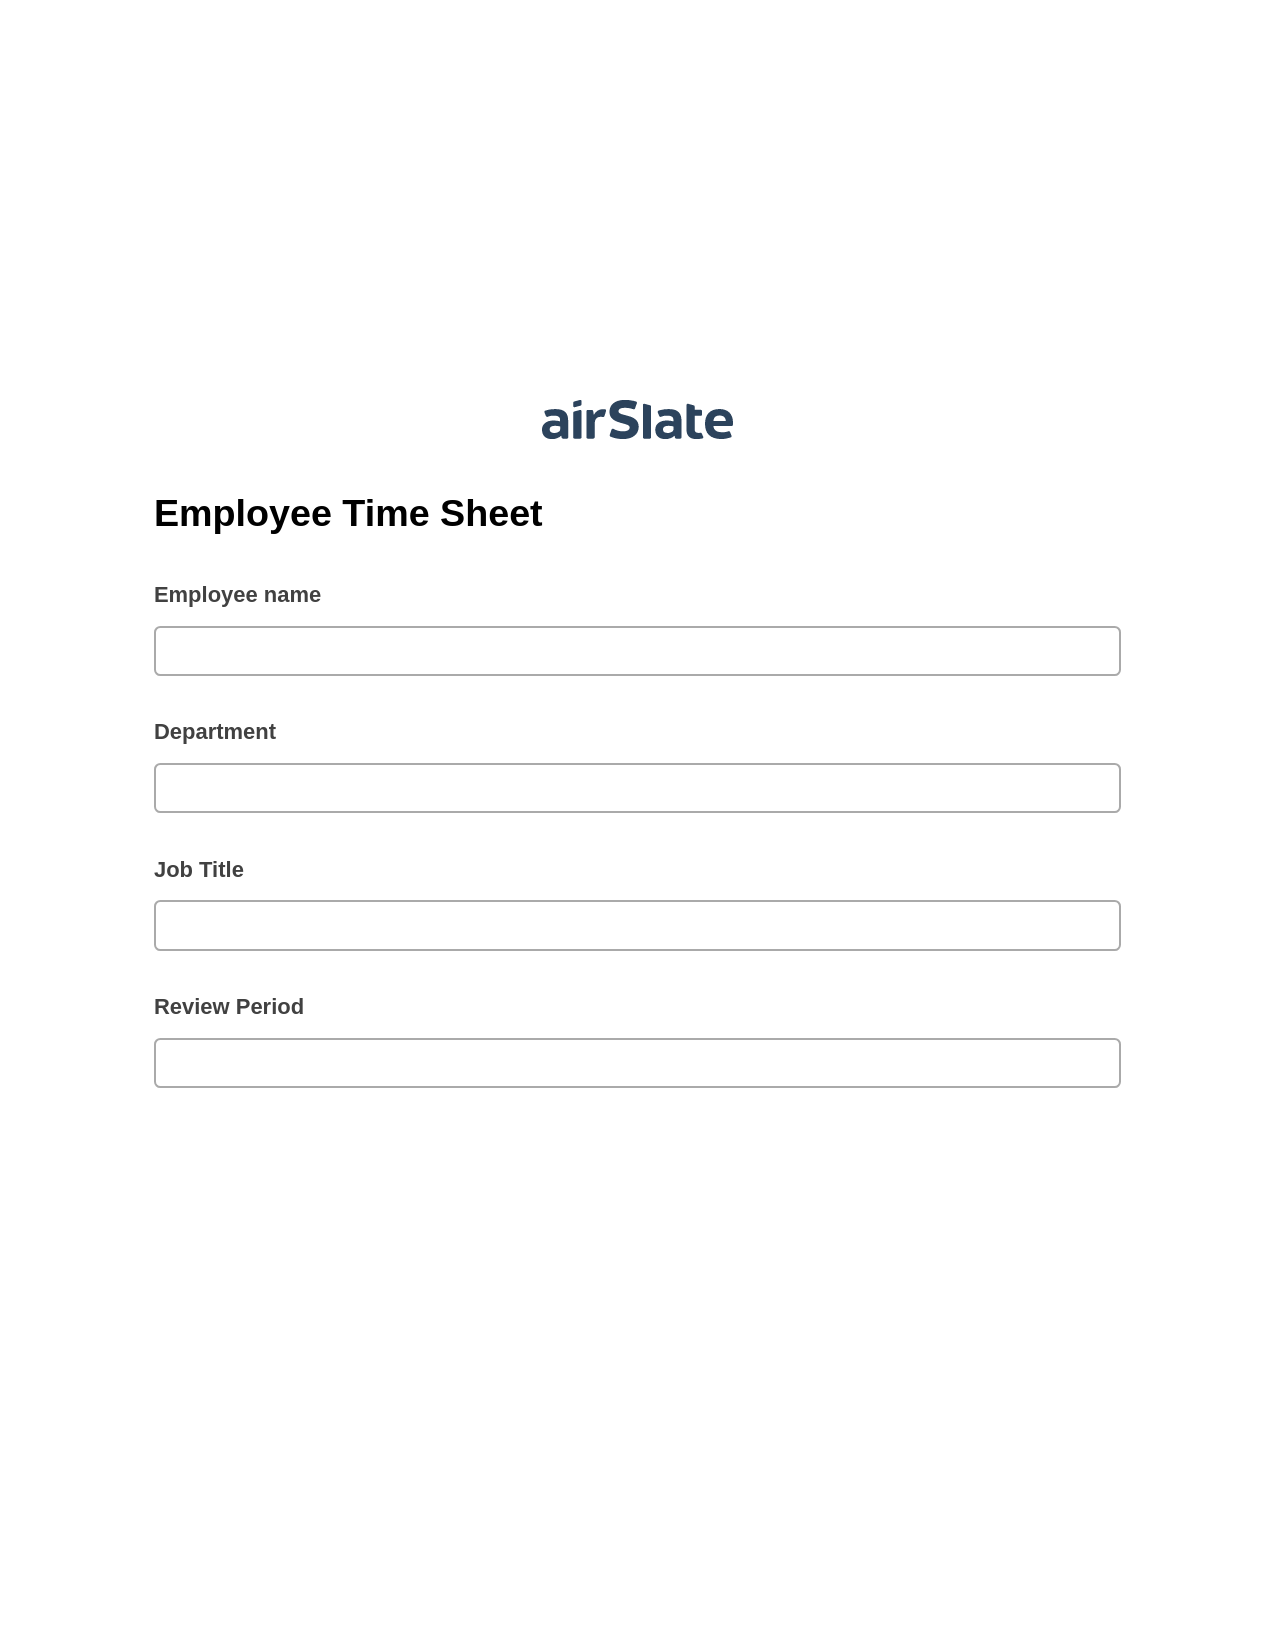 Employee Time Sheet Pre-fill from Office 365 Excel Bot, Invoke Salesforce Process Bot, Export to Excel 365 Bot